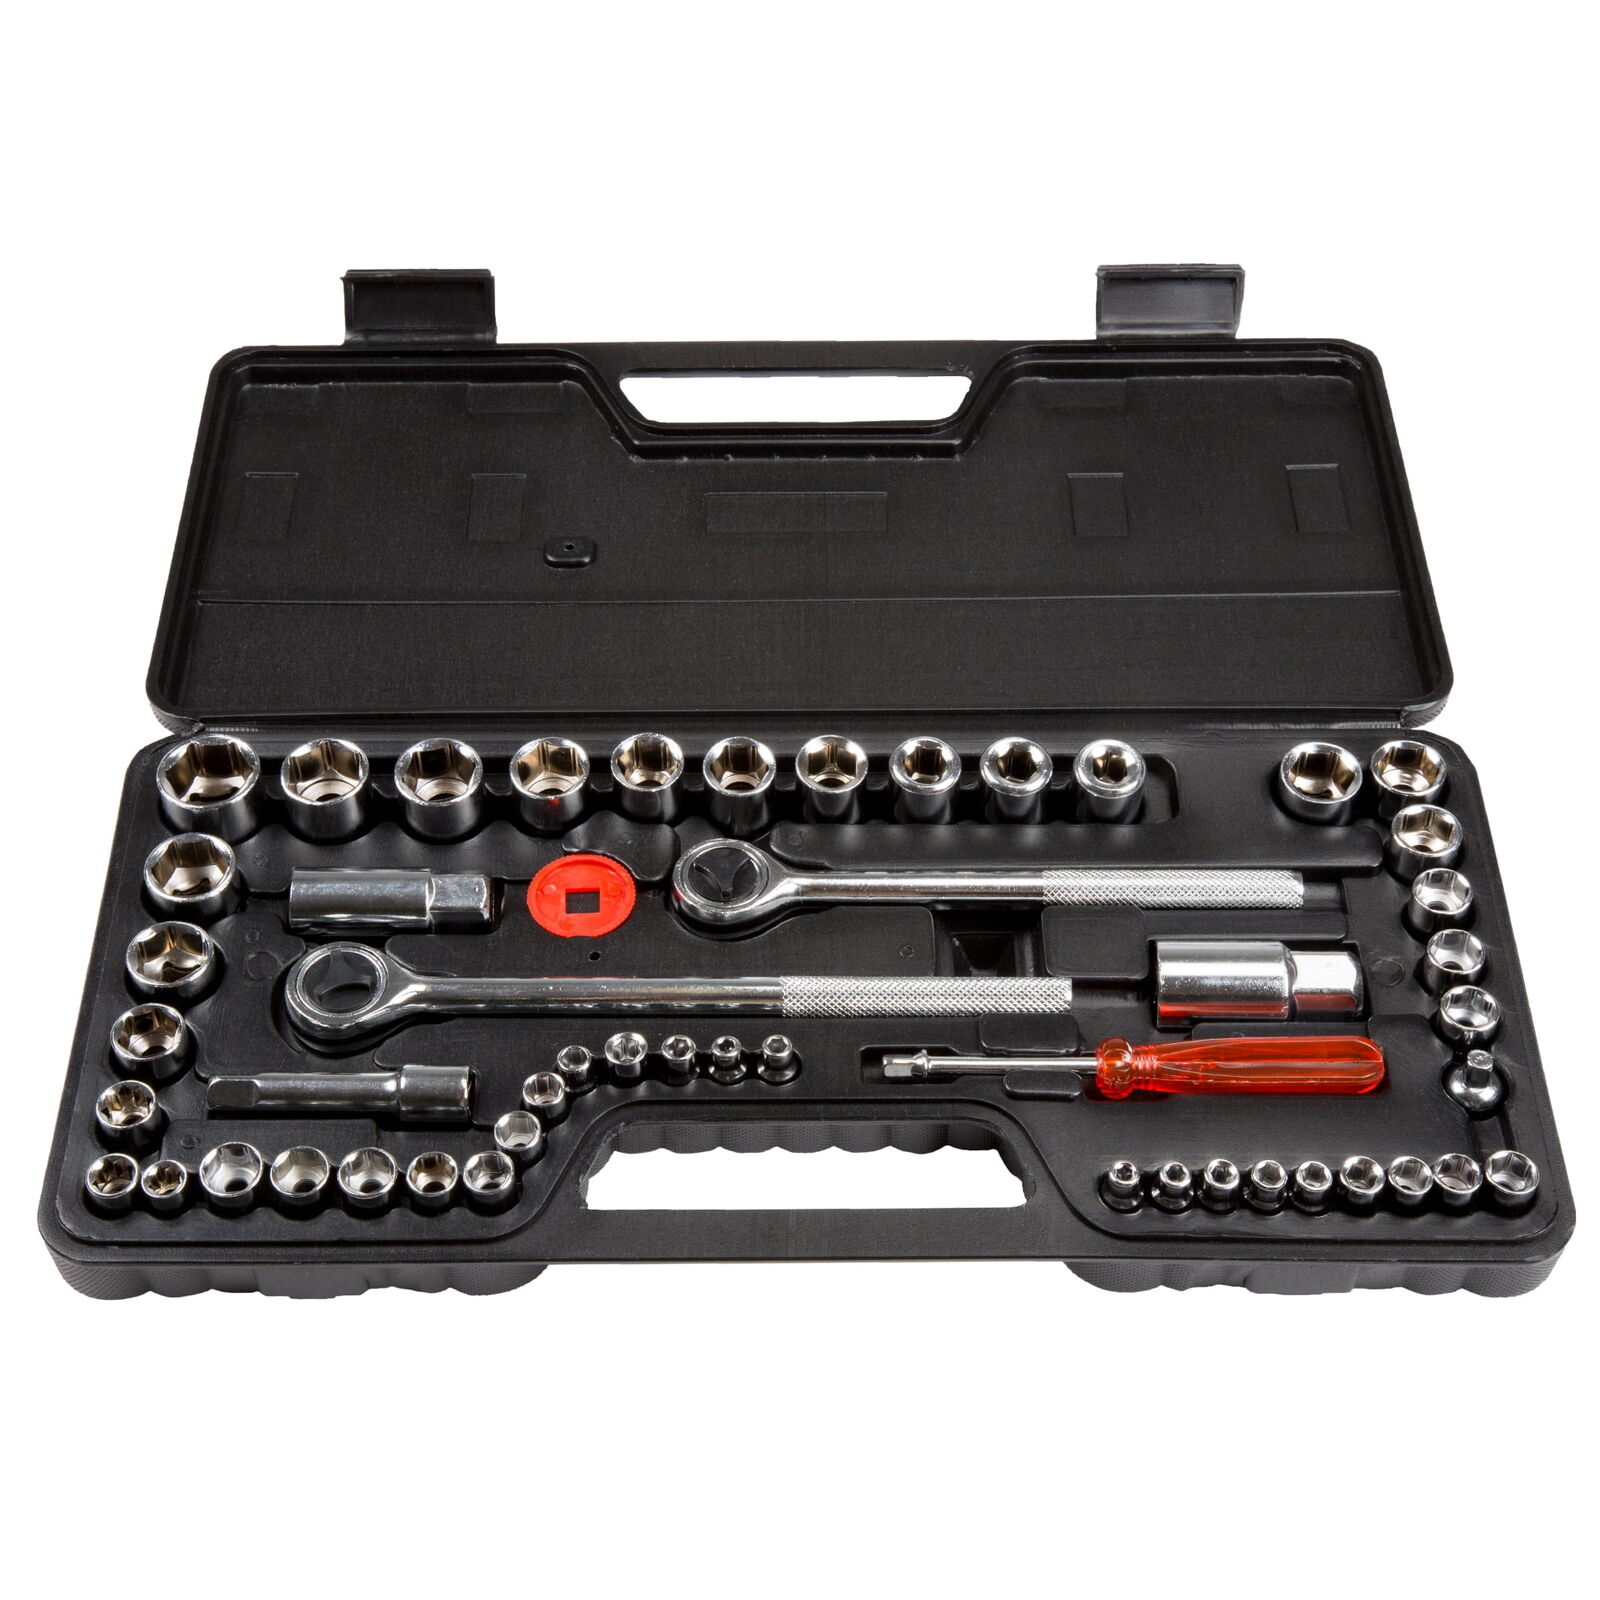 Stalwart 52-Piece 1/4, 3/8 and 1/2 Drive Metric and SAE Socket Set, W550057